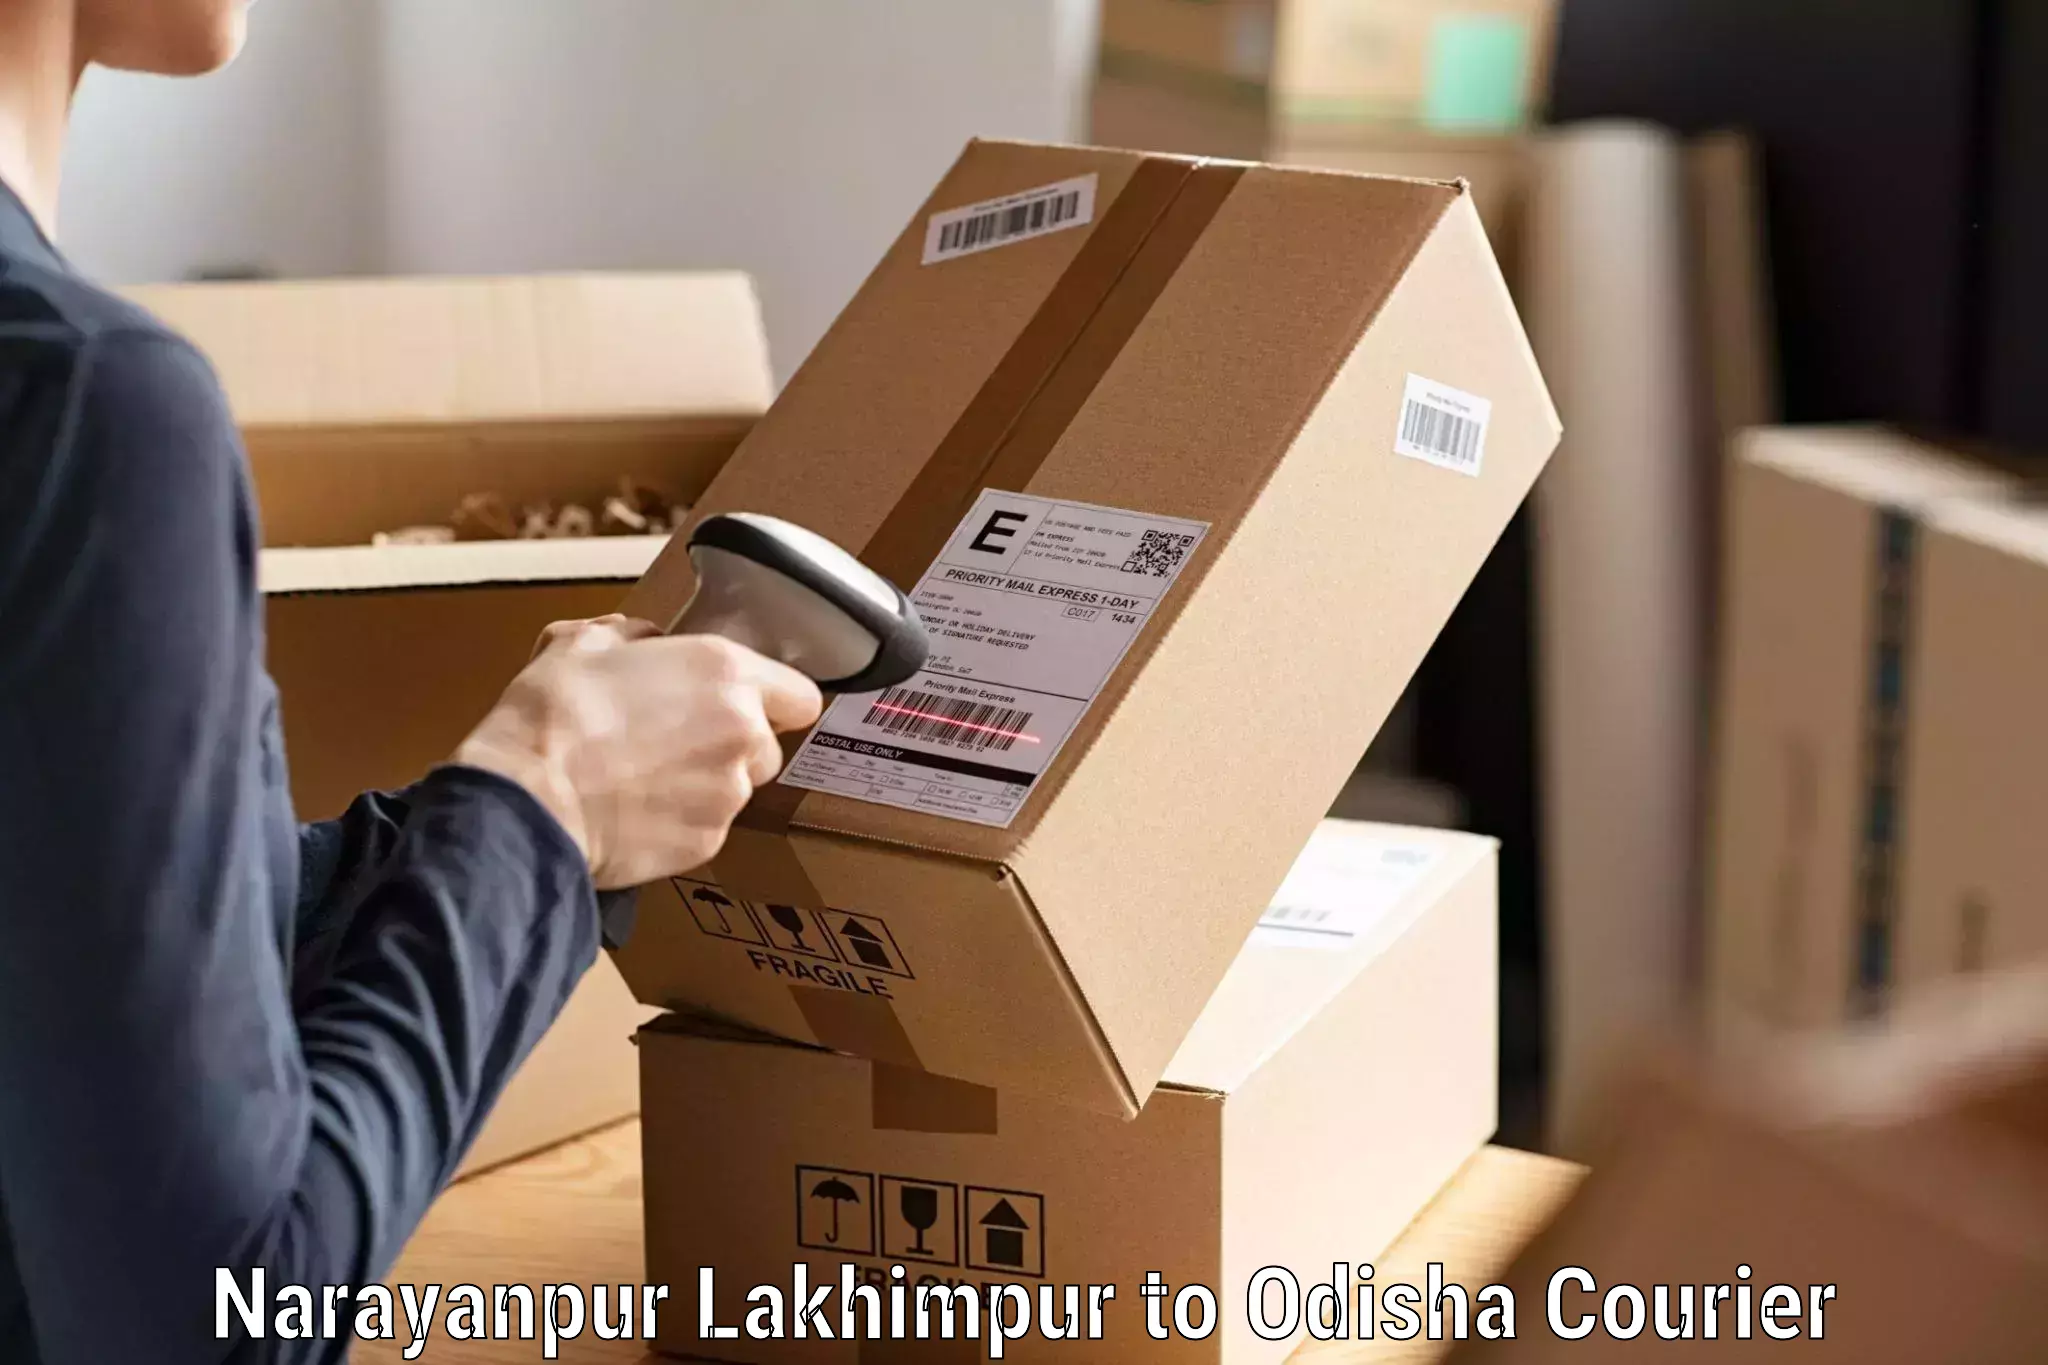 Multi-city courier Narayanpur Lakhimpur to Athagarh